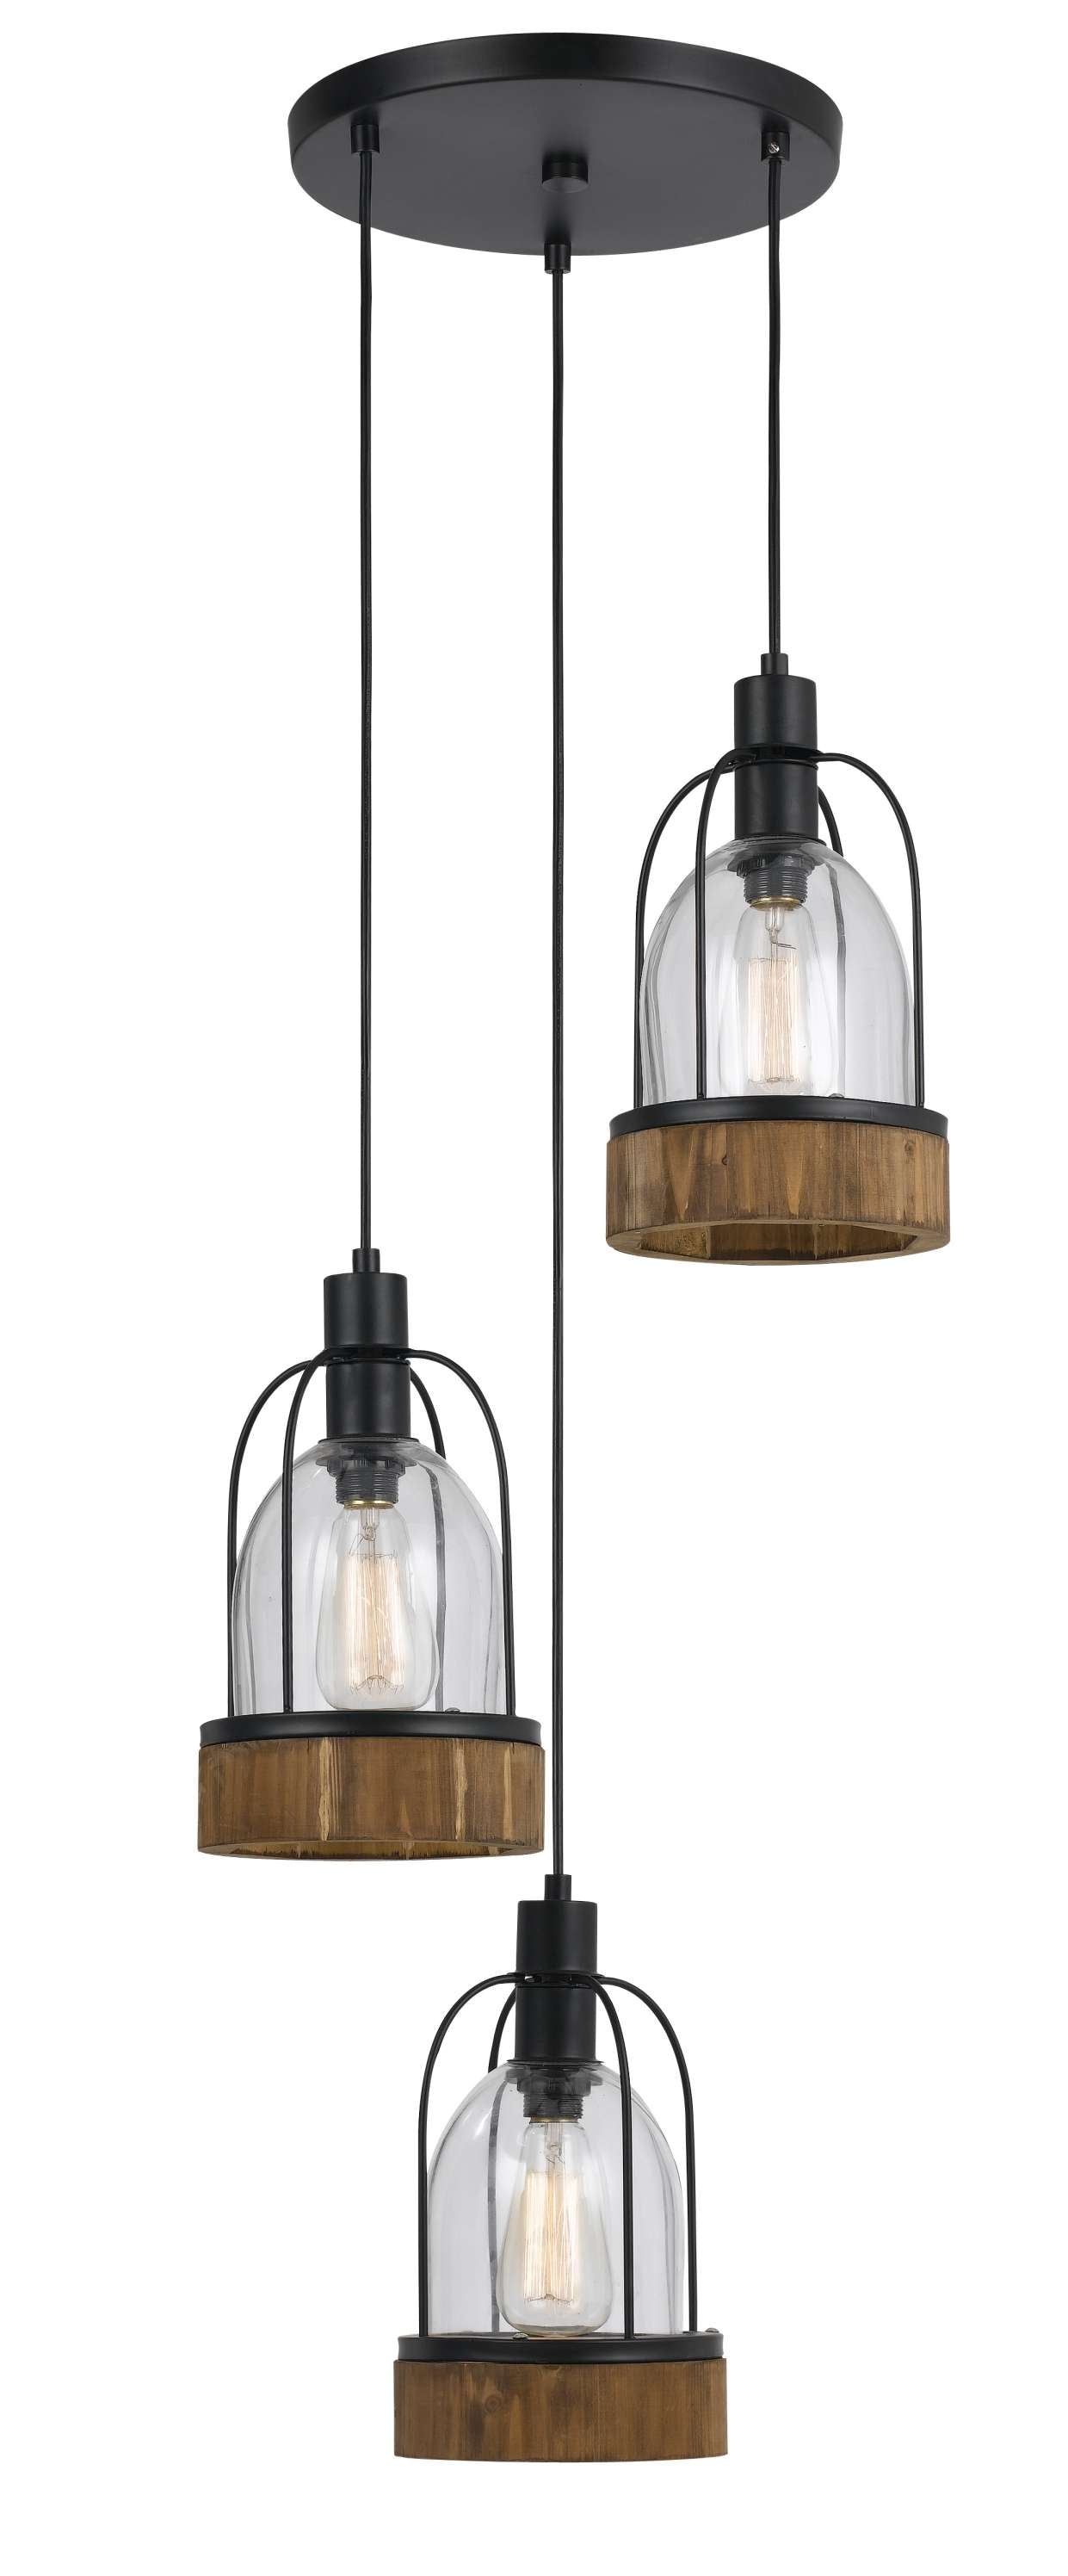 60 X 3 Watt Metal And Wood Pendant With Glass Encasing, Brown And Black By Benzara